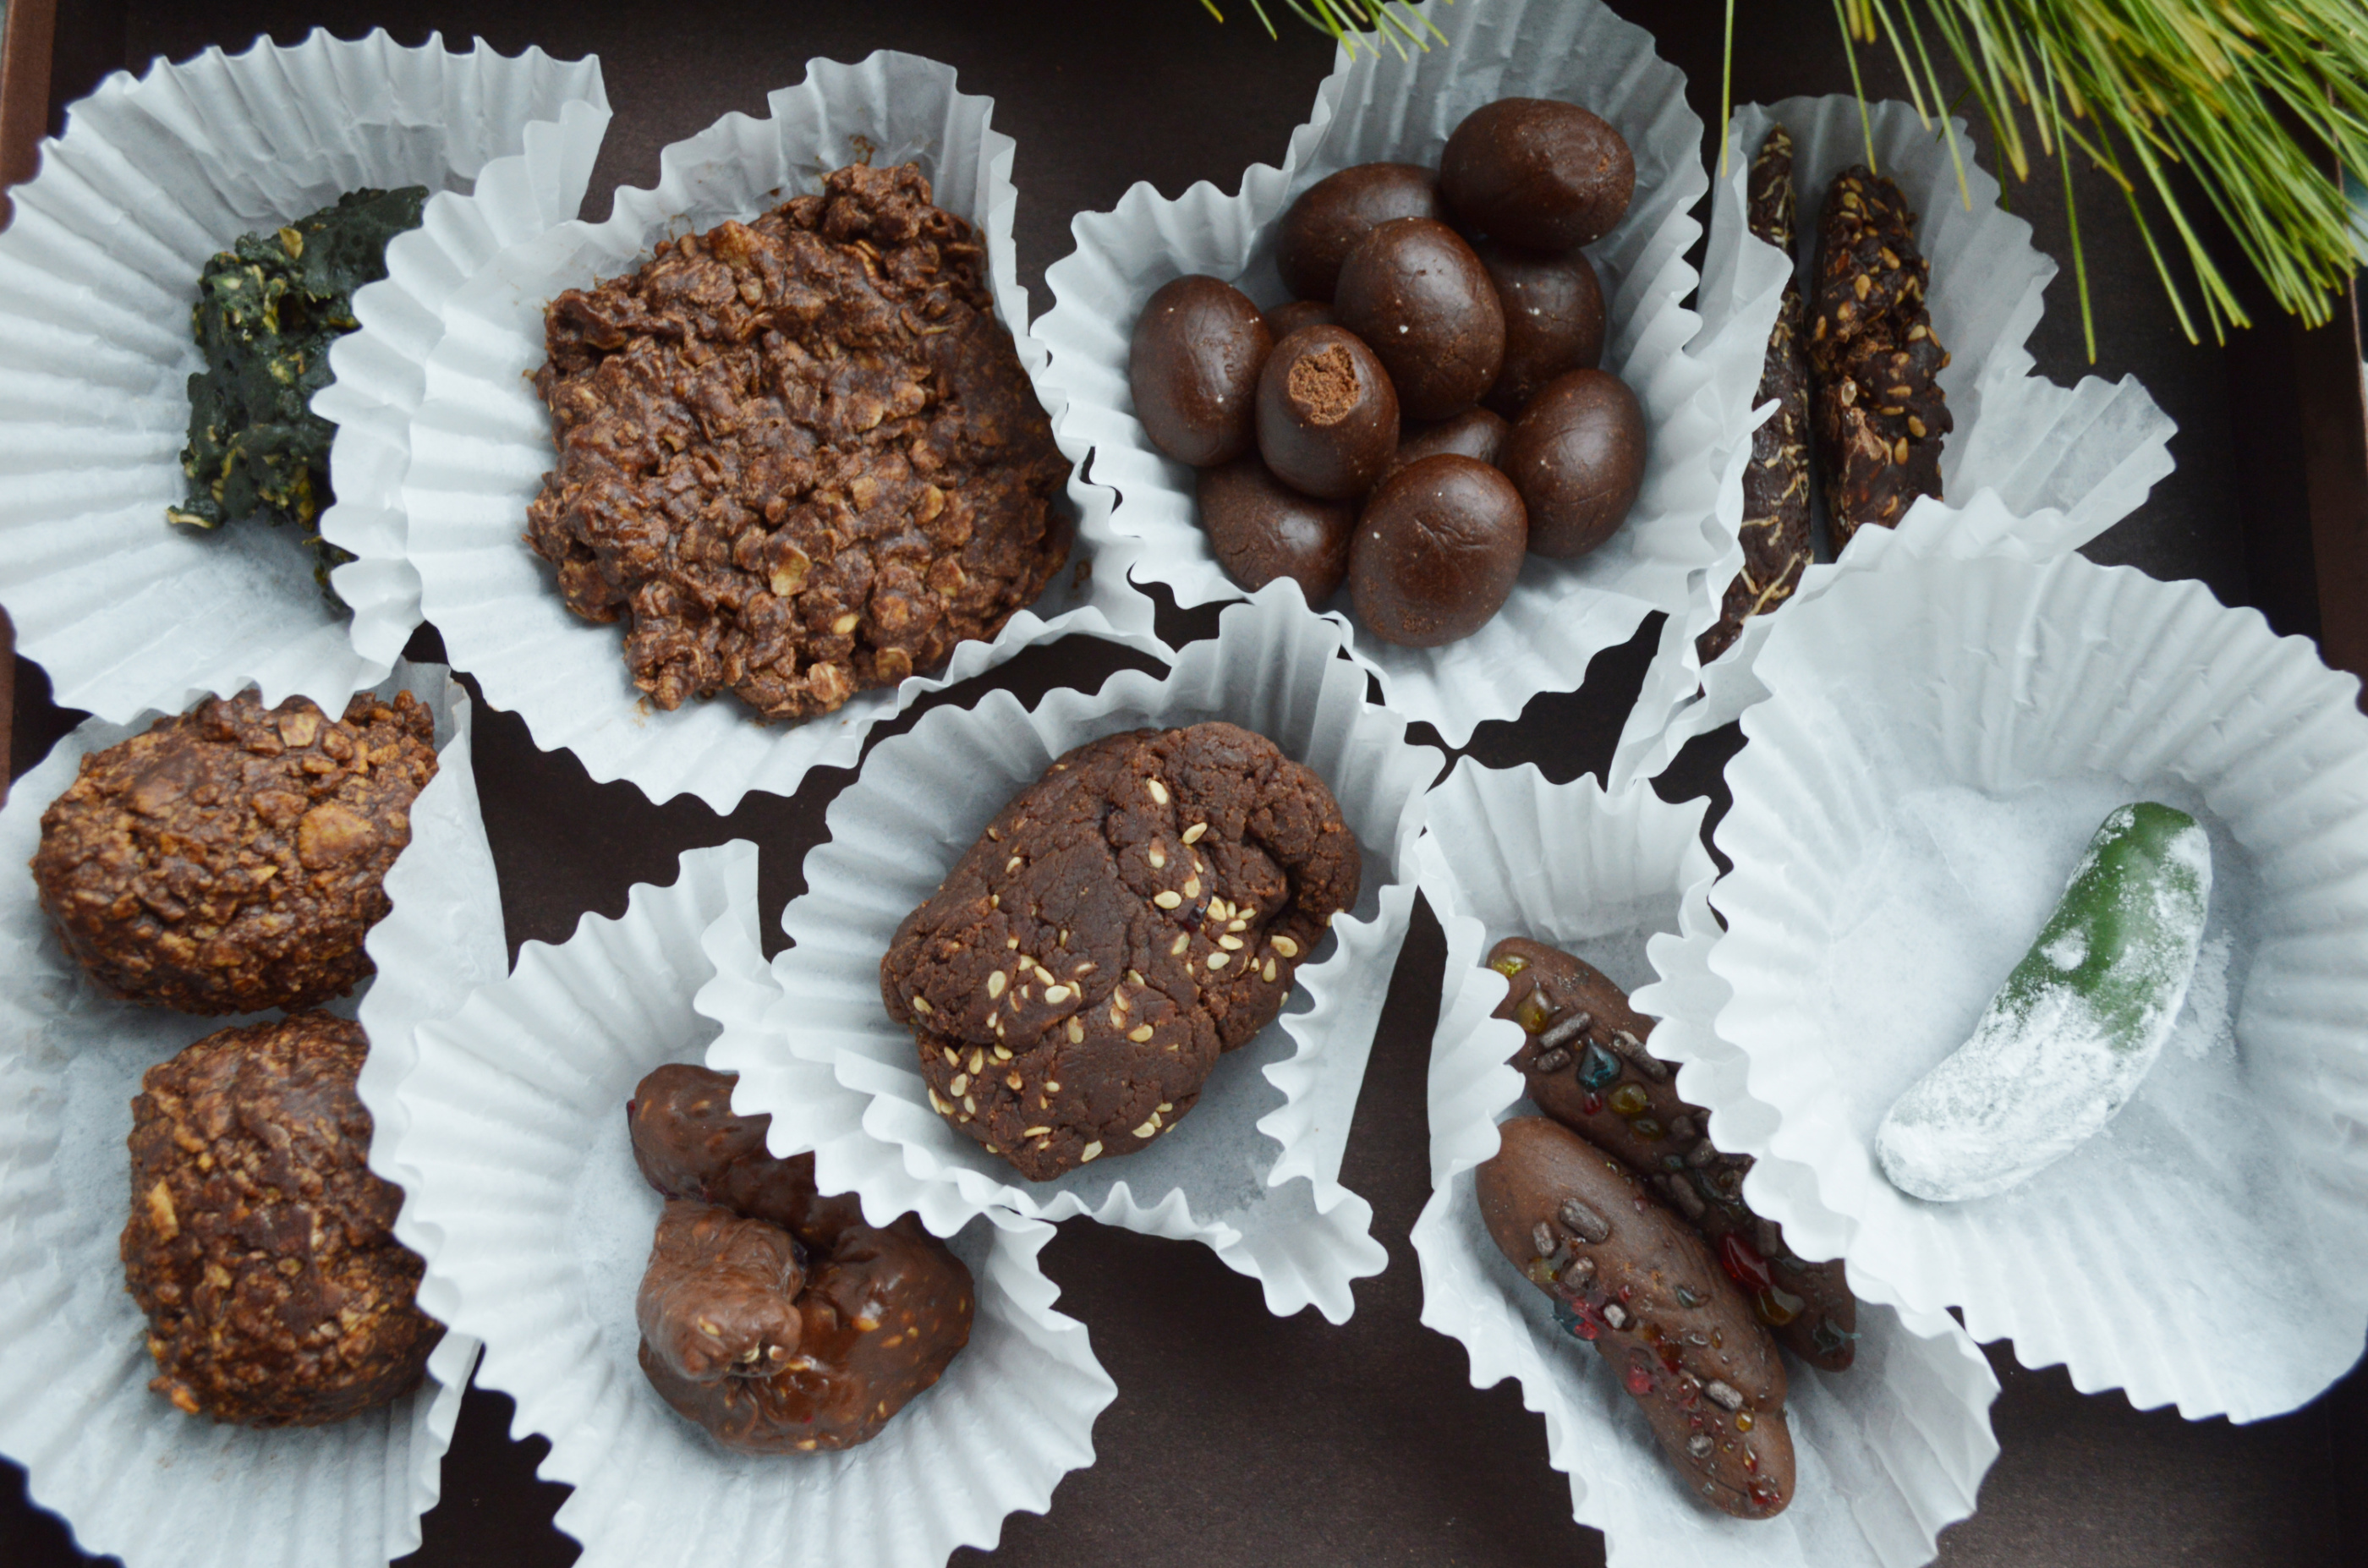 A selection of chocolates shaped to look like animal scat in white cupcake liners.